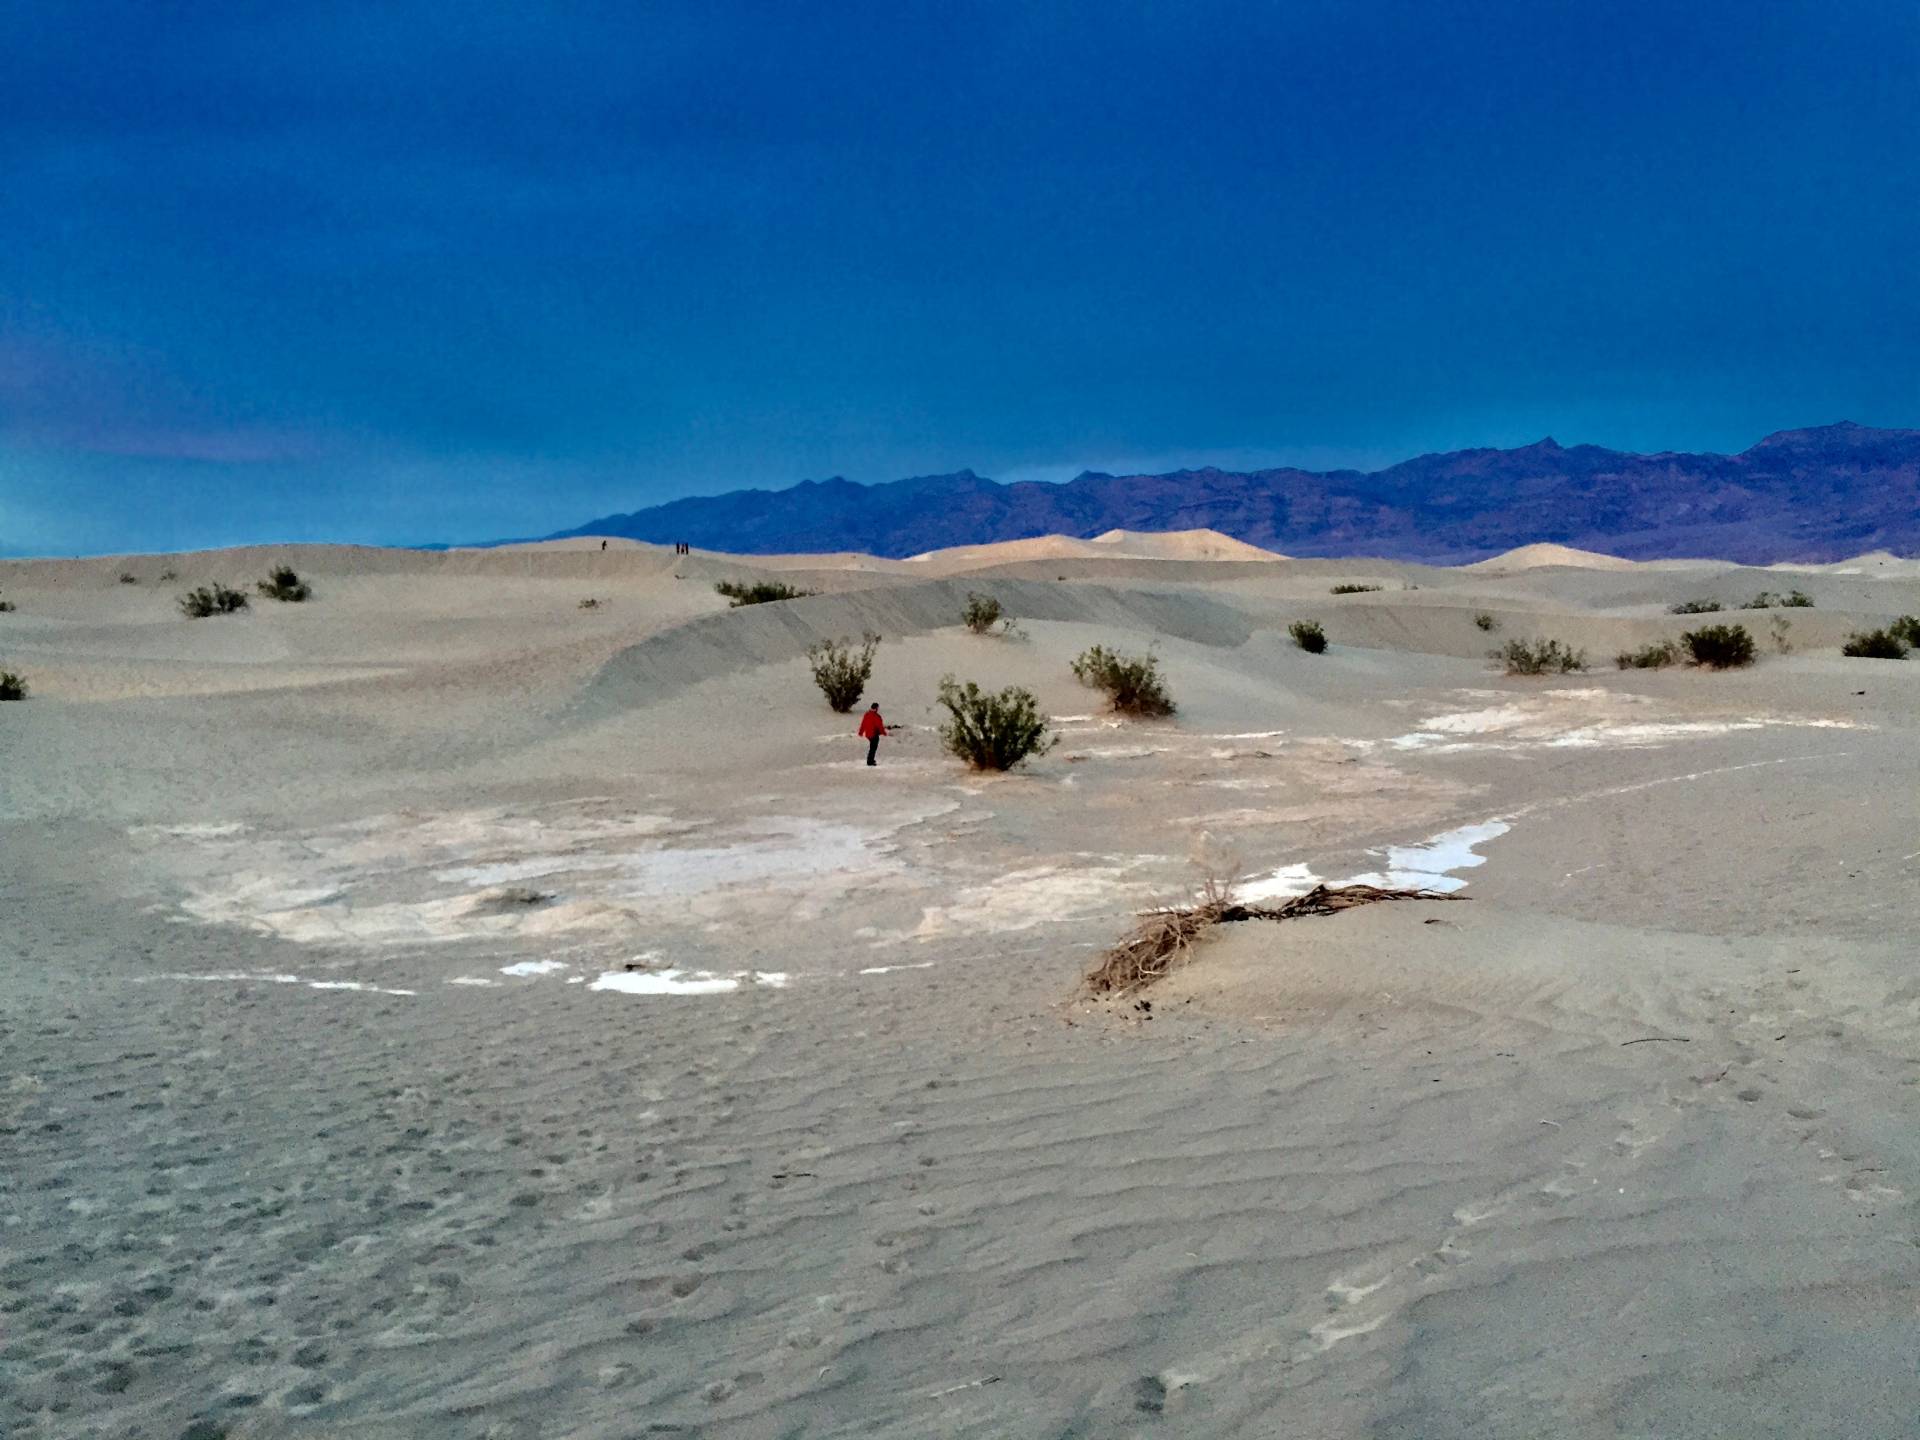 Hiking in the Mesquite Sand Dunes, Death Valley National Park, California